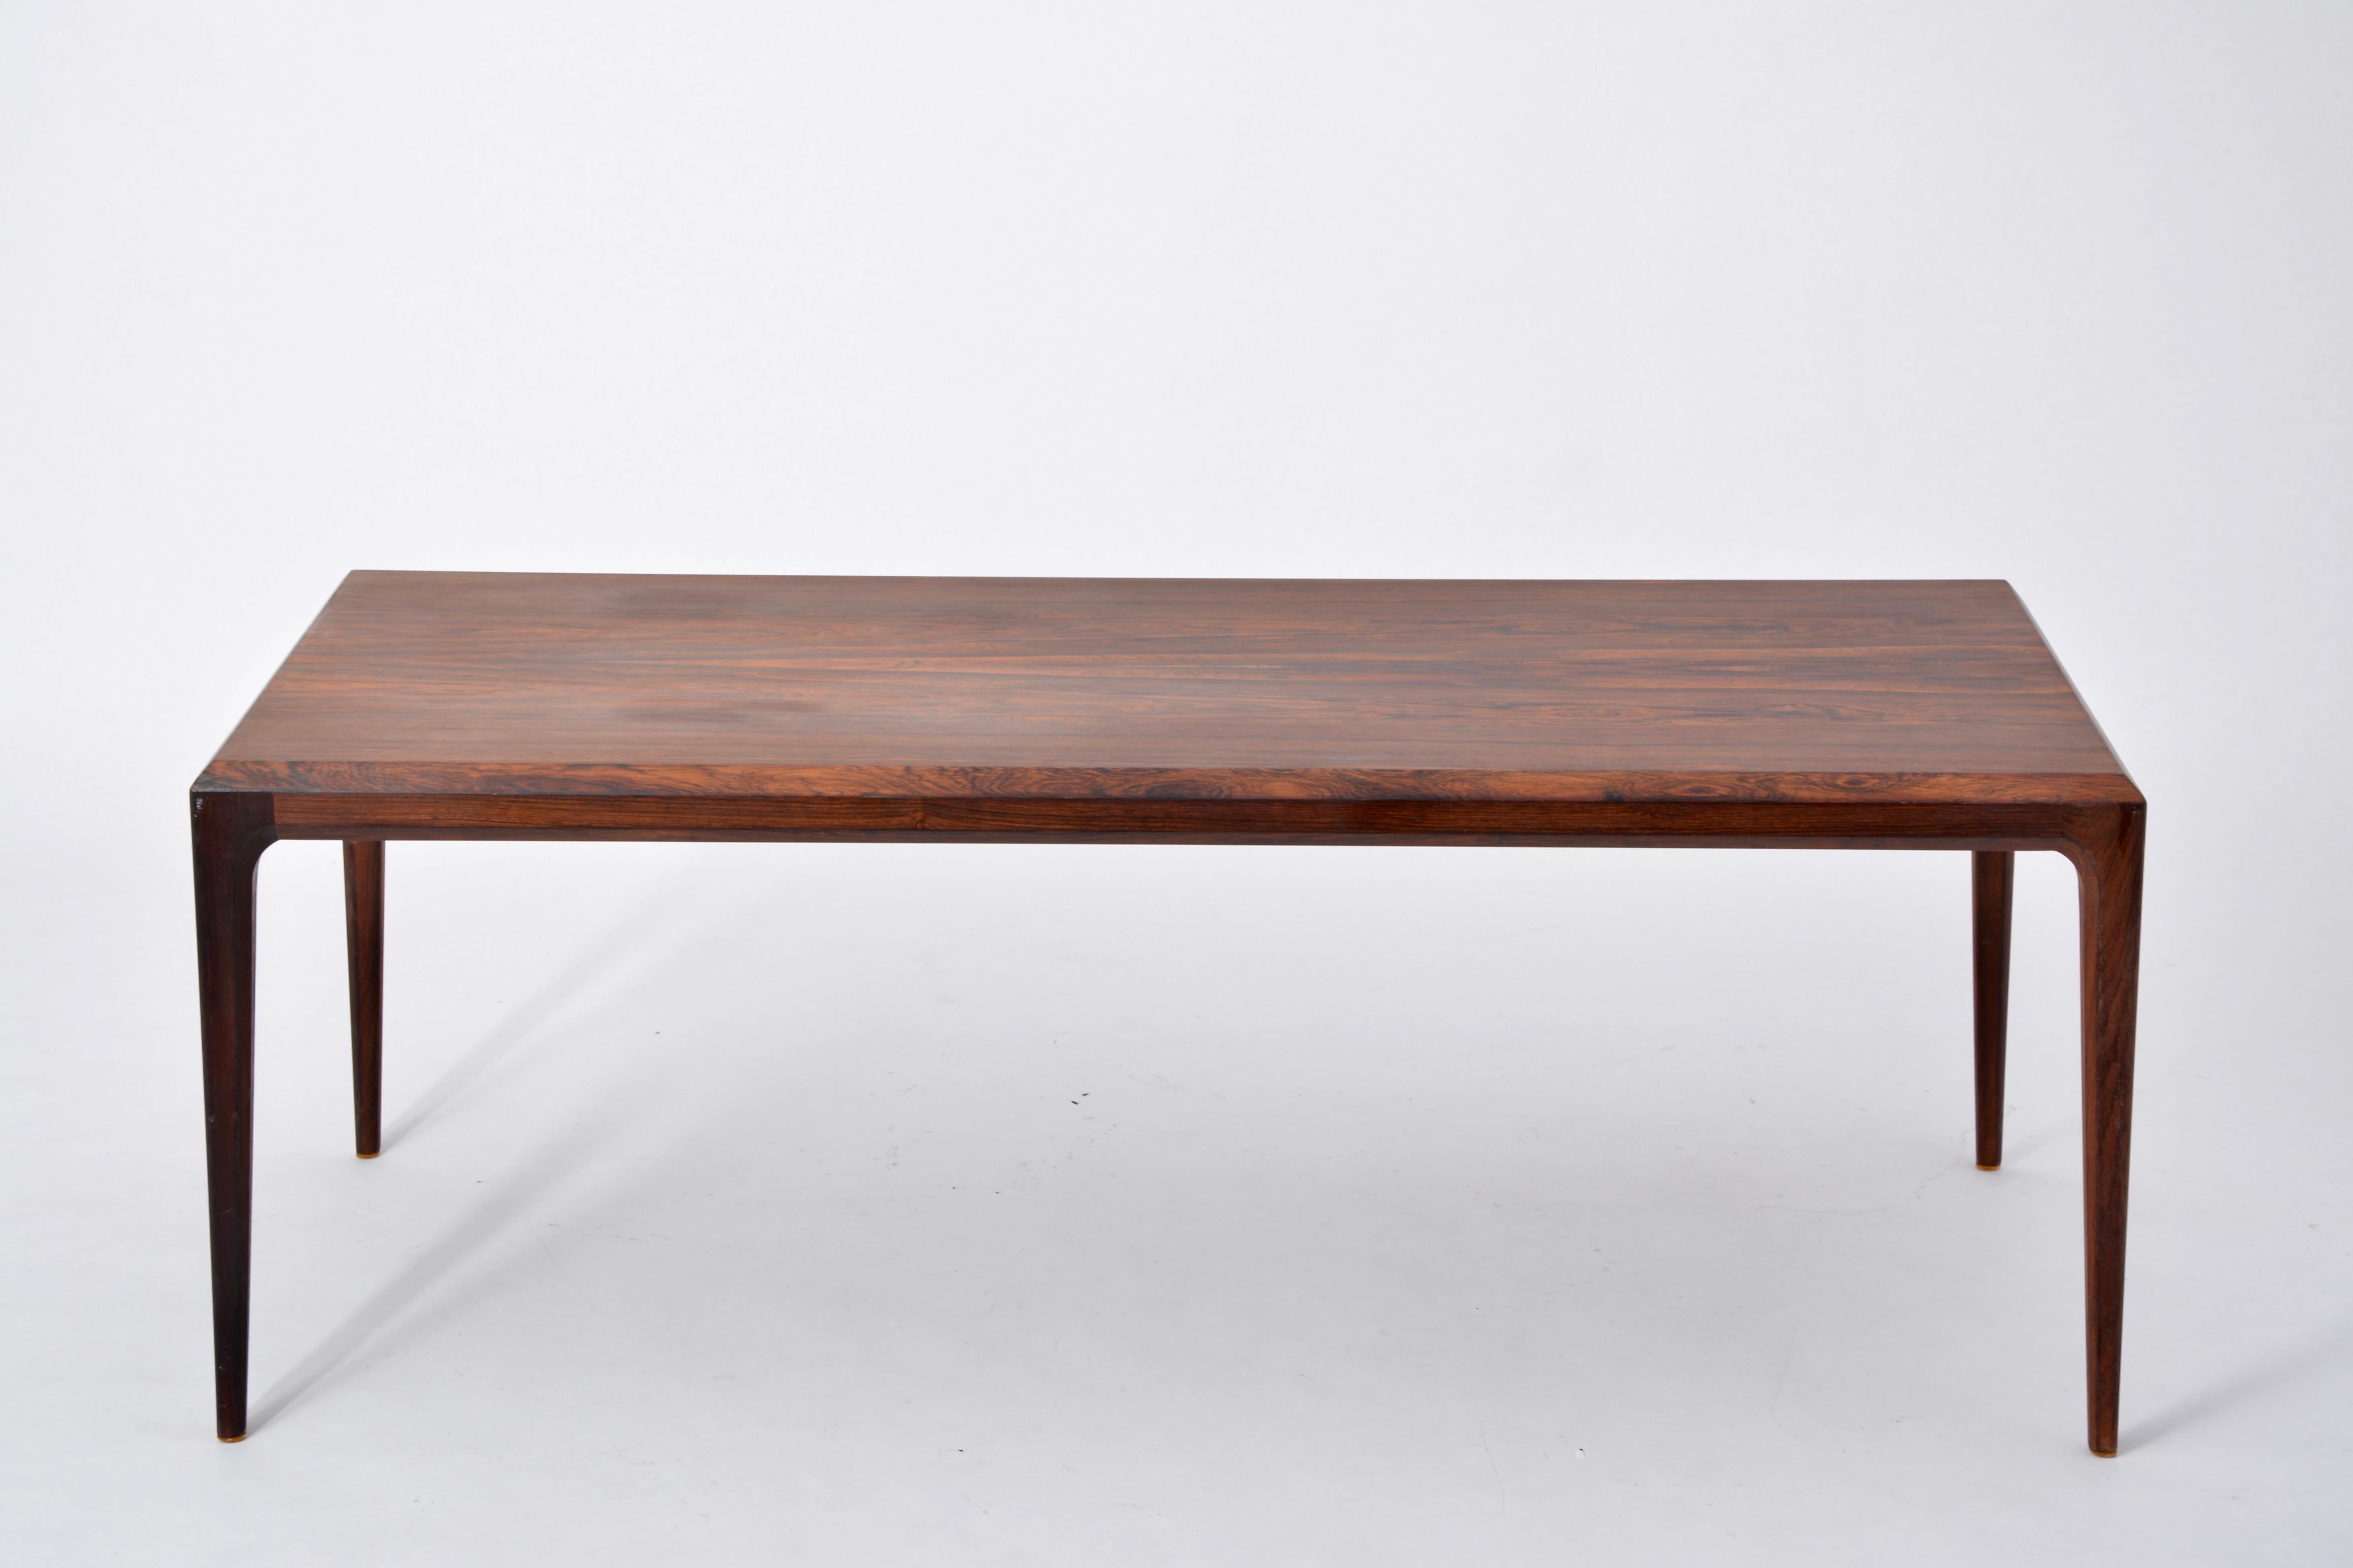 Rosewood coffee table designed by Johannes Andersen and produced by CFC Silkeborg, Denmark in the 1960s. The table had some small chips on the edges which have been repaired (see photos).